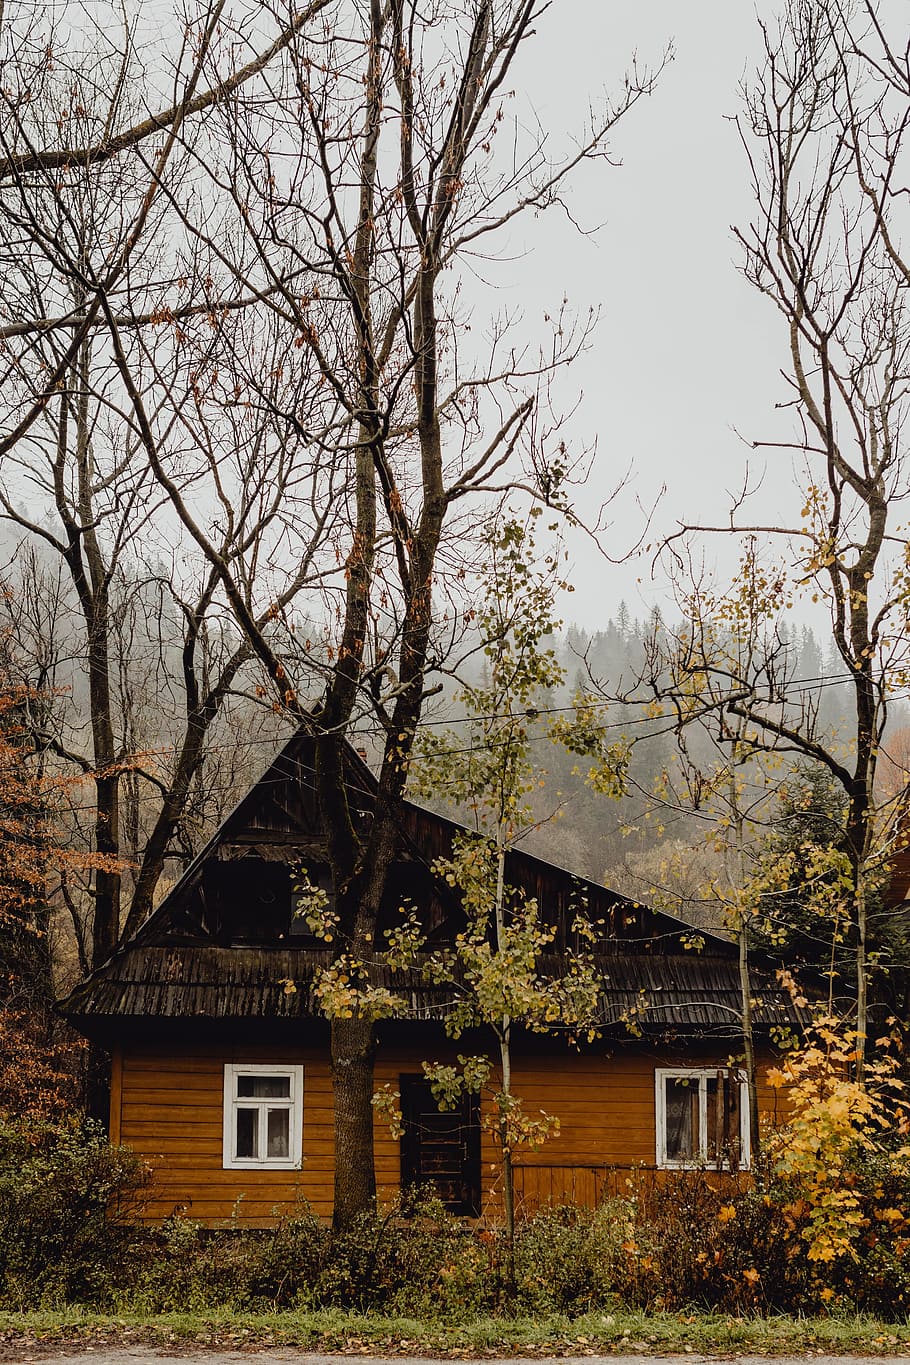 Old Wooden Houses In The Mountains In Autumn, Old House